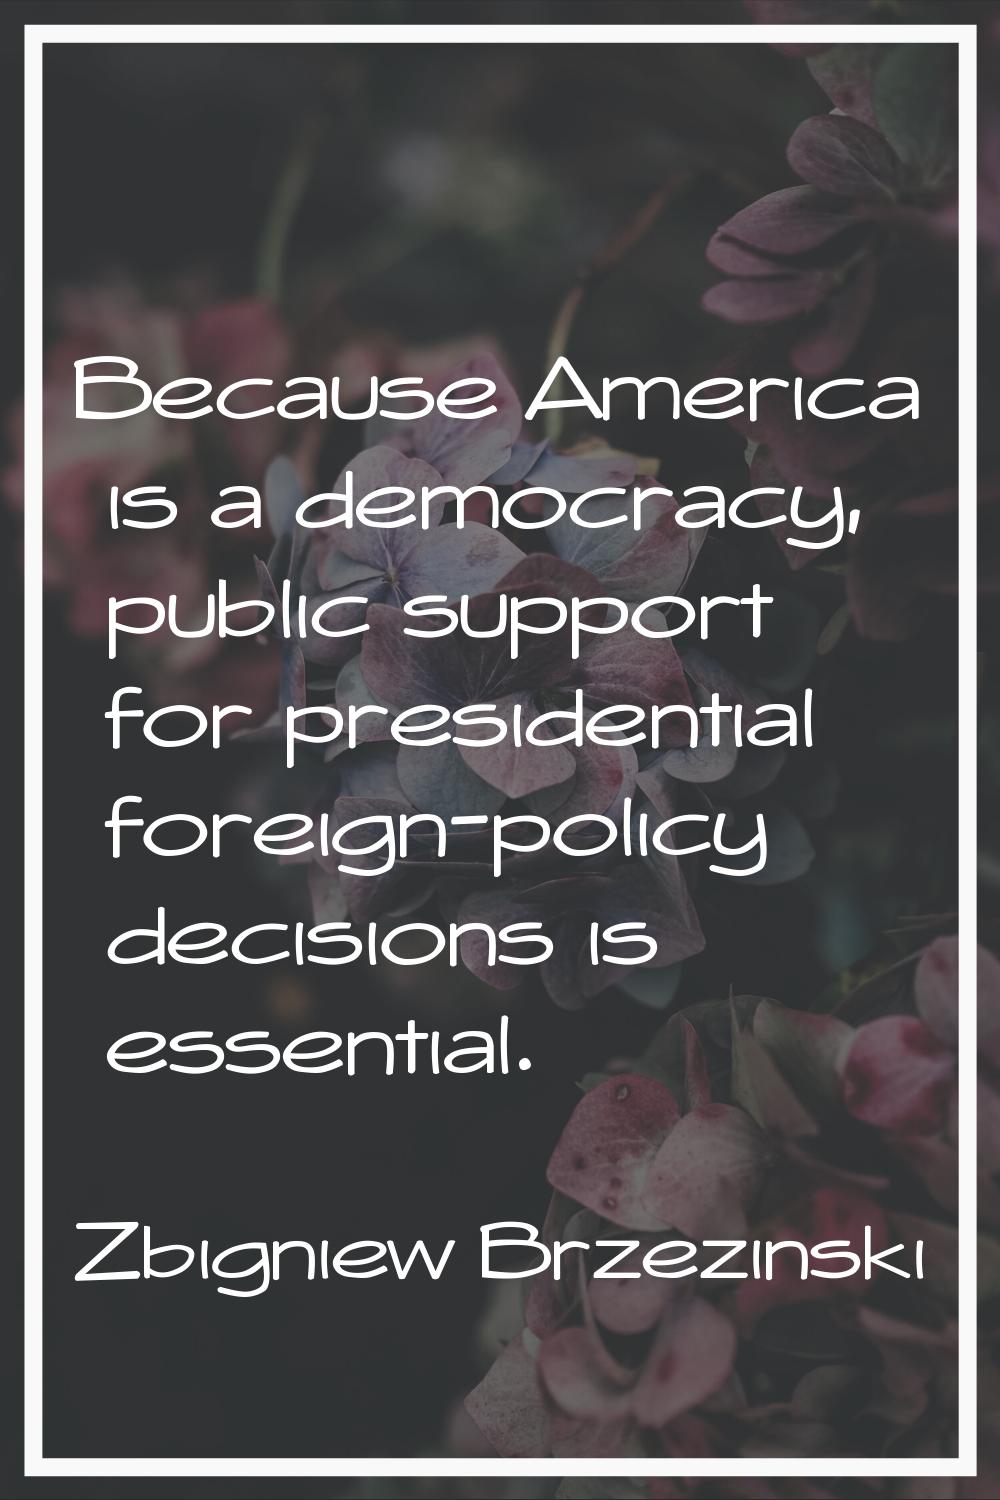 Because America is a democracy, public support for presidential foreign-policy decisions is essenti